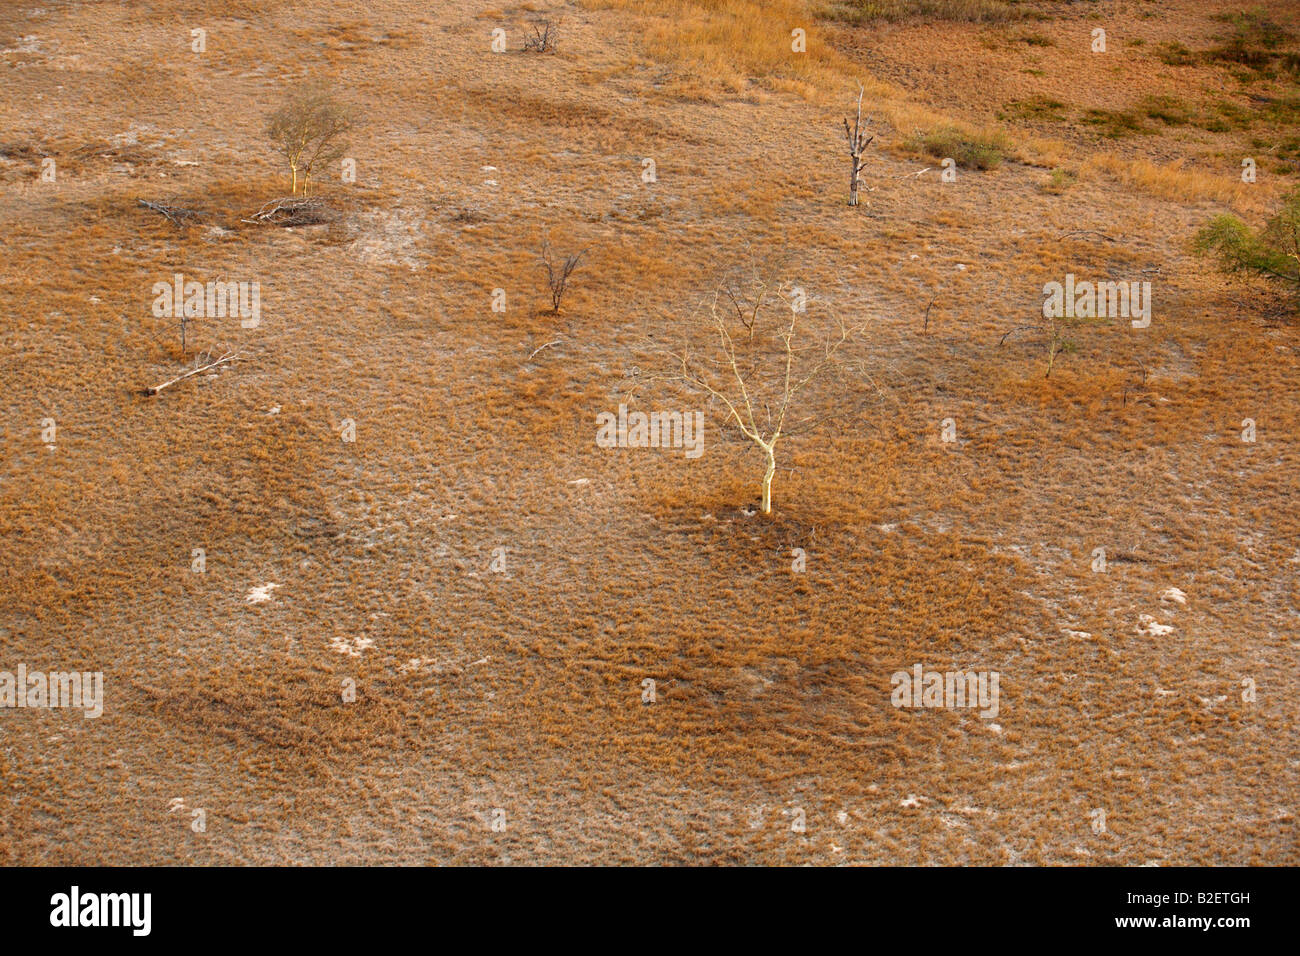 Aerial view of a lone Fever tree (Acacia xanthophloea) surrounded by tufted veld grass Stock Photo